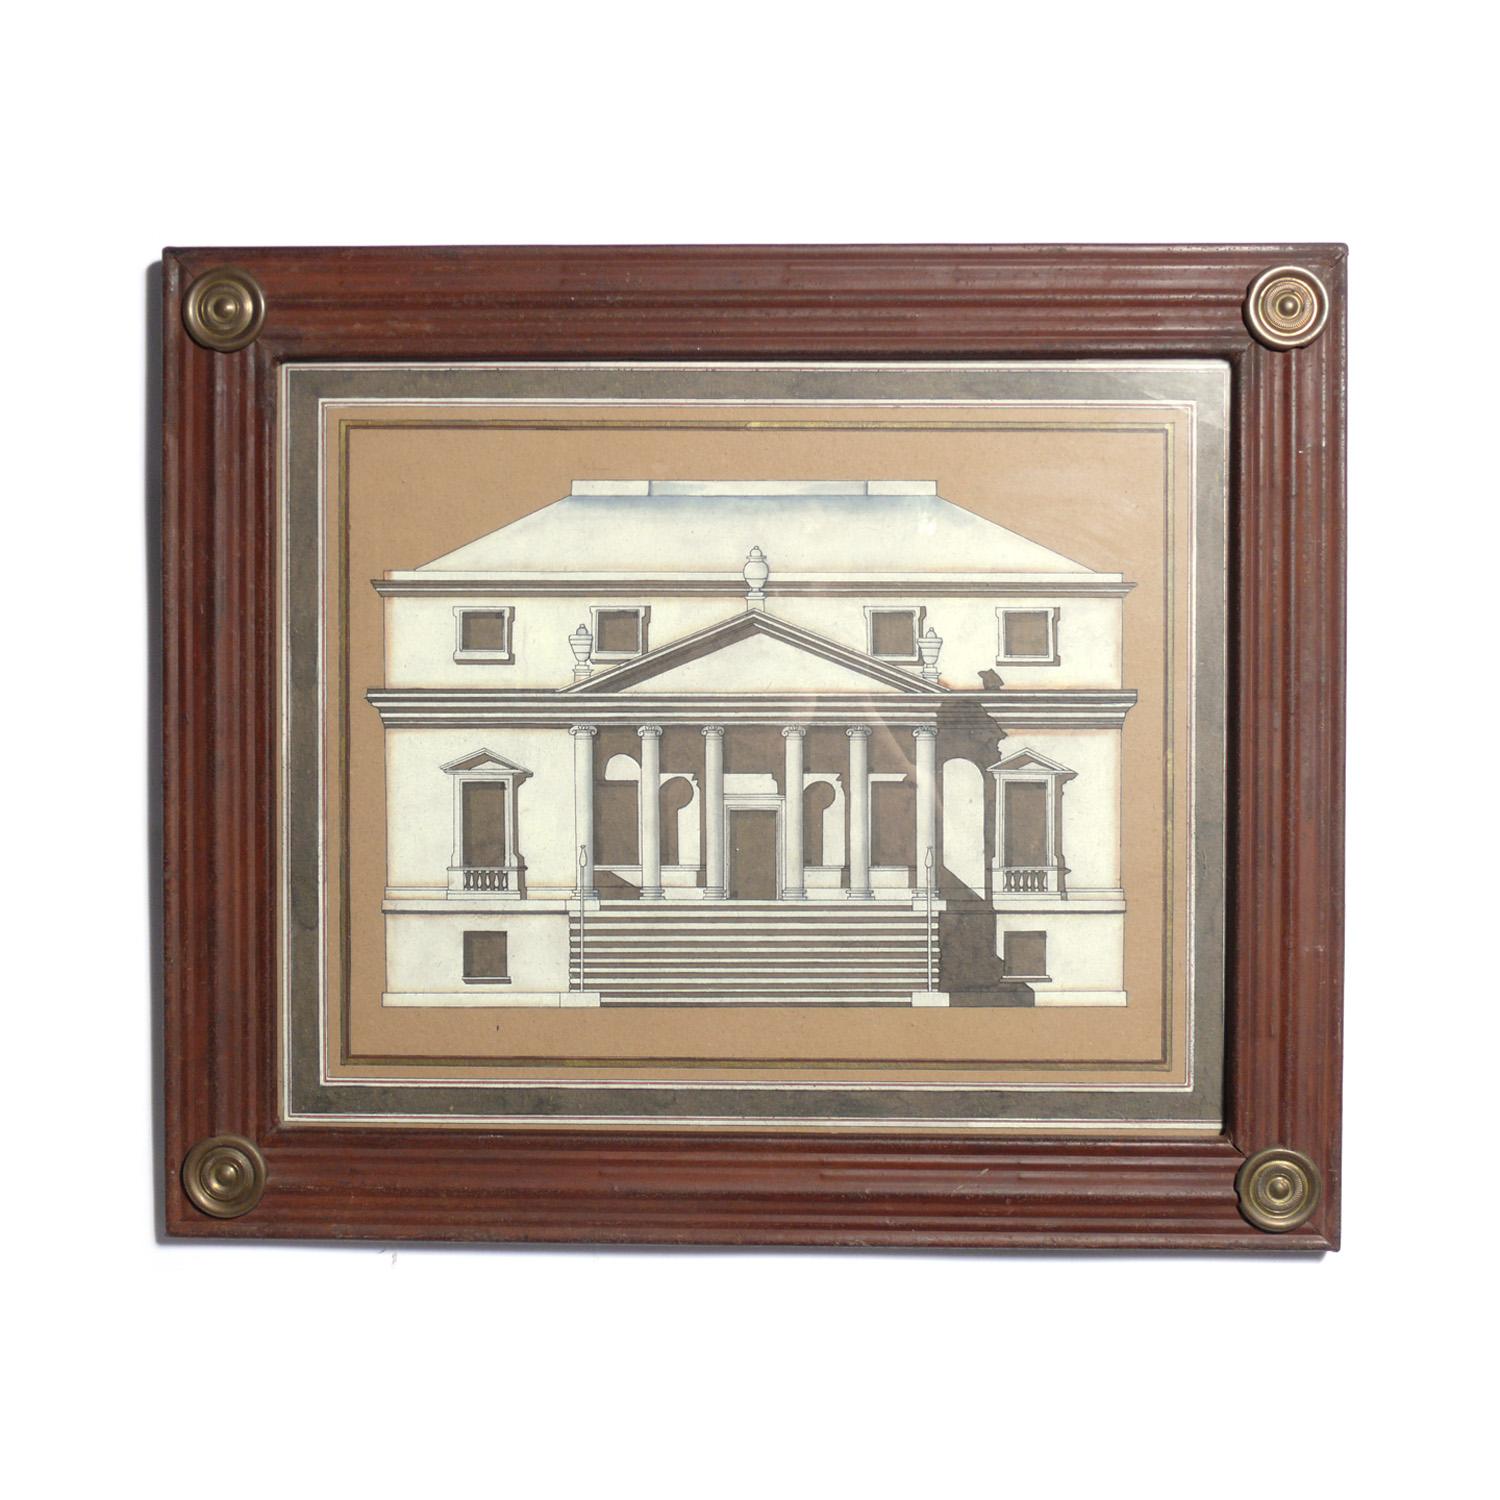 Neoclassical Architectural Drawings for John Rosselli 1